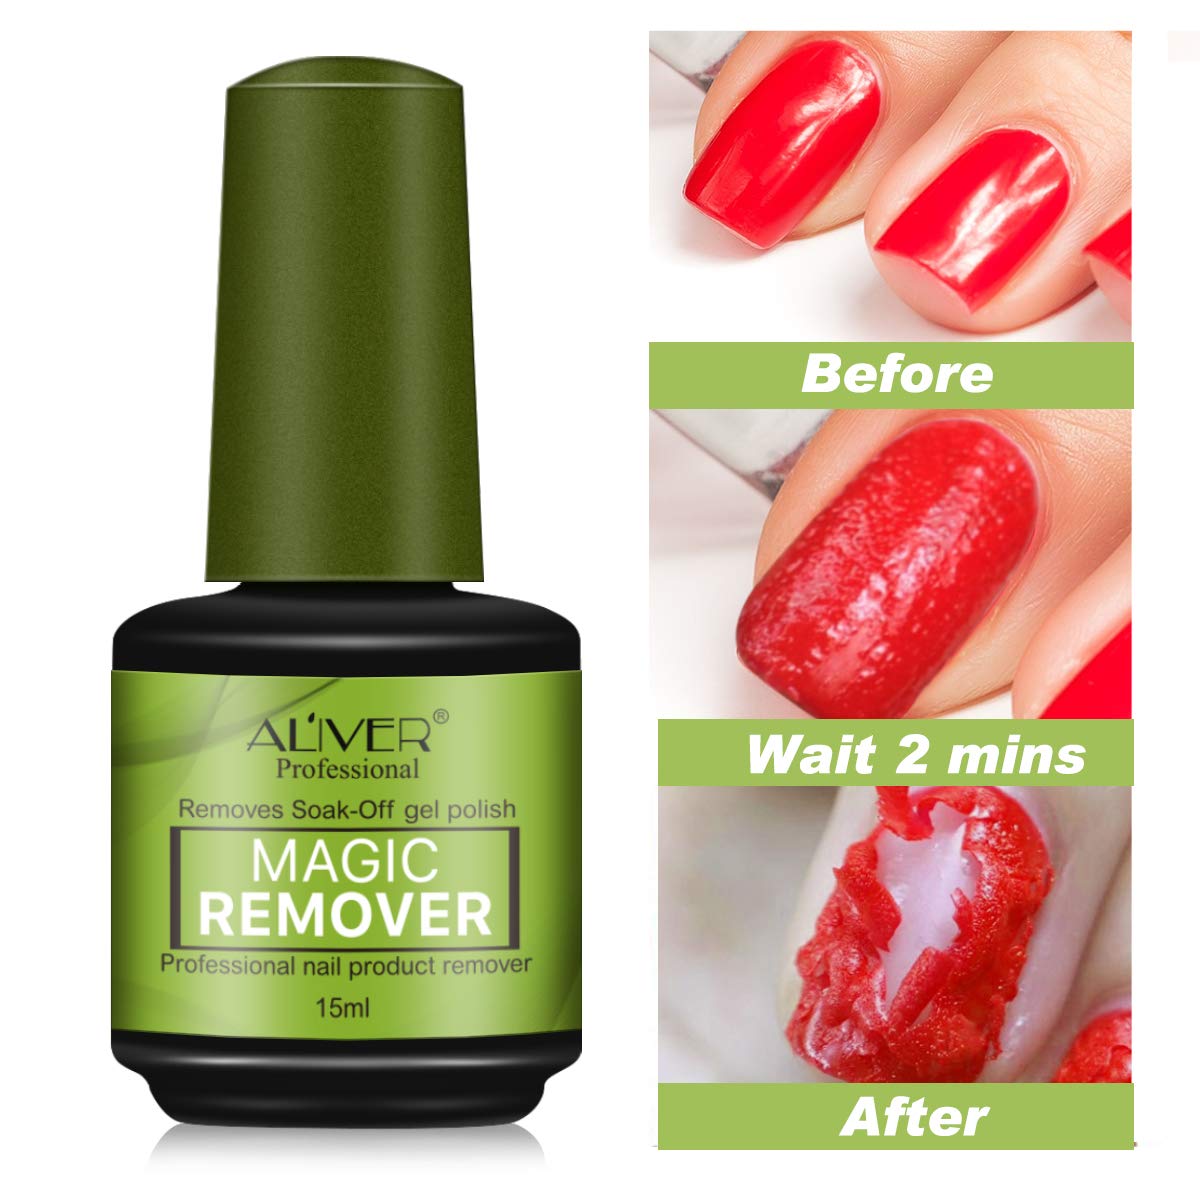 Here's How to Remove Your Dip Manicure At Home